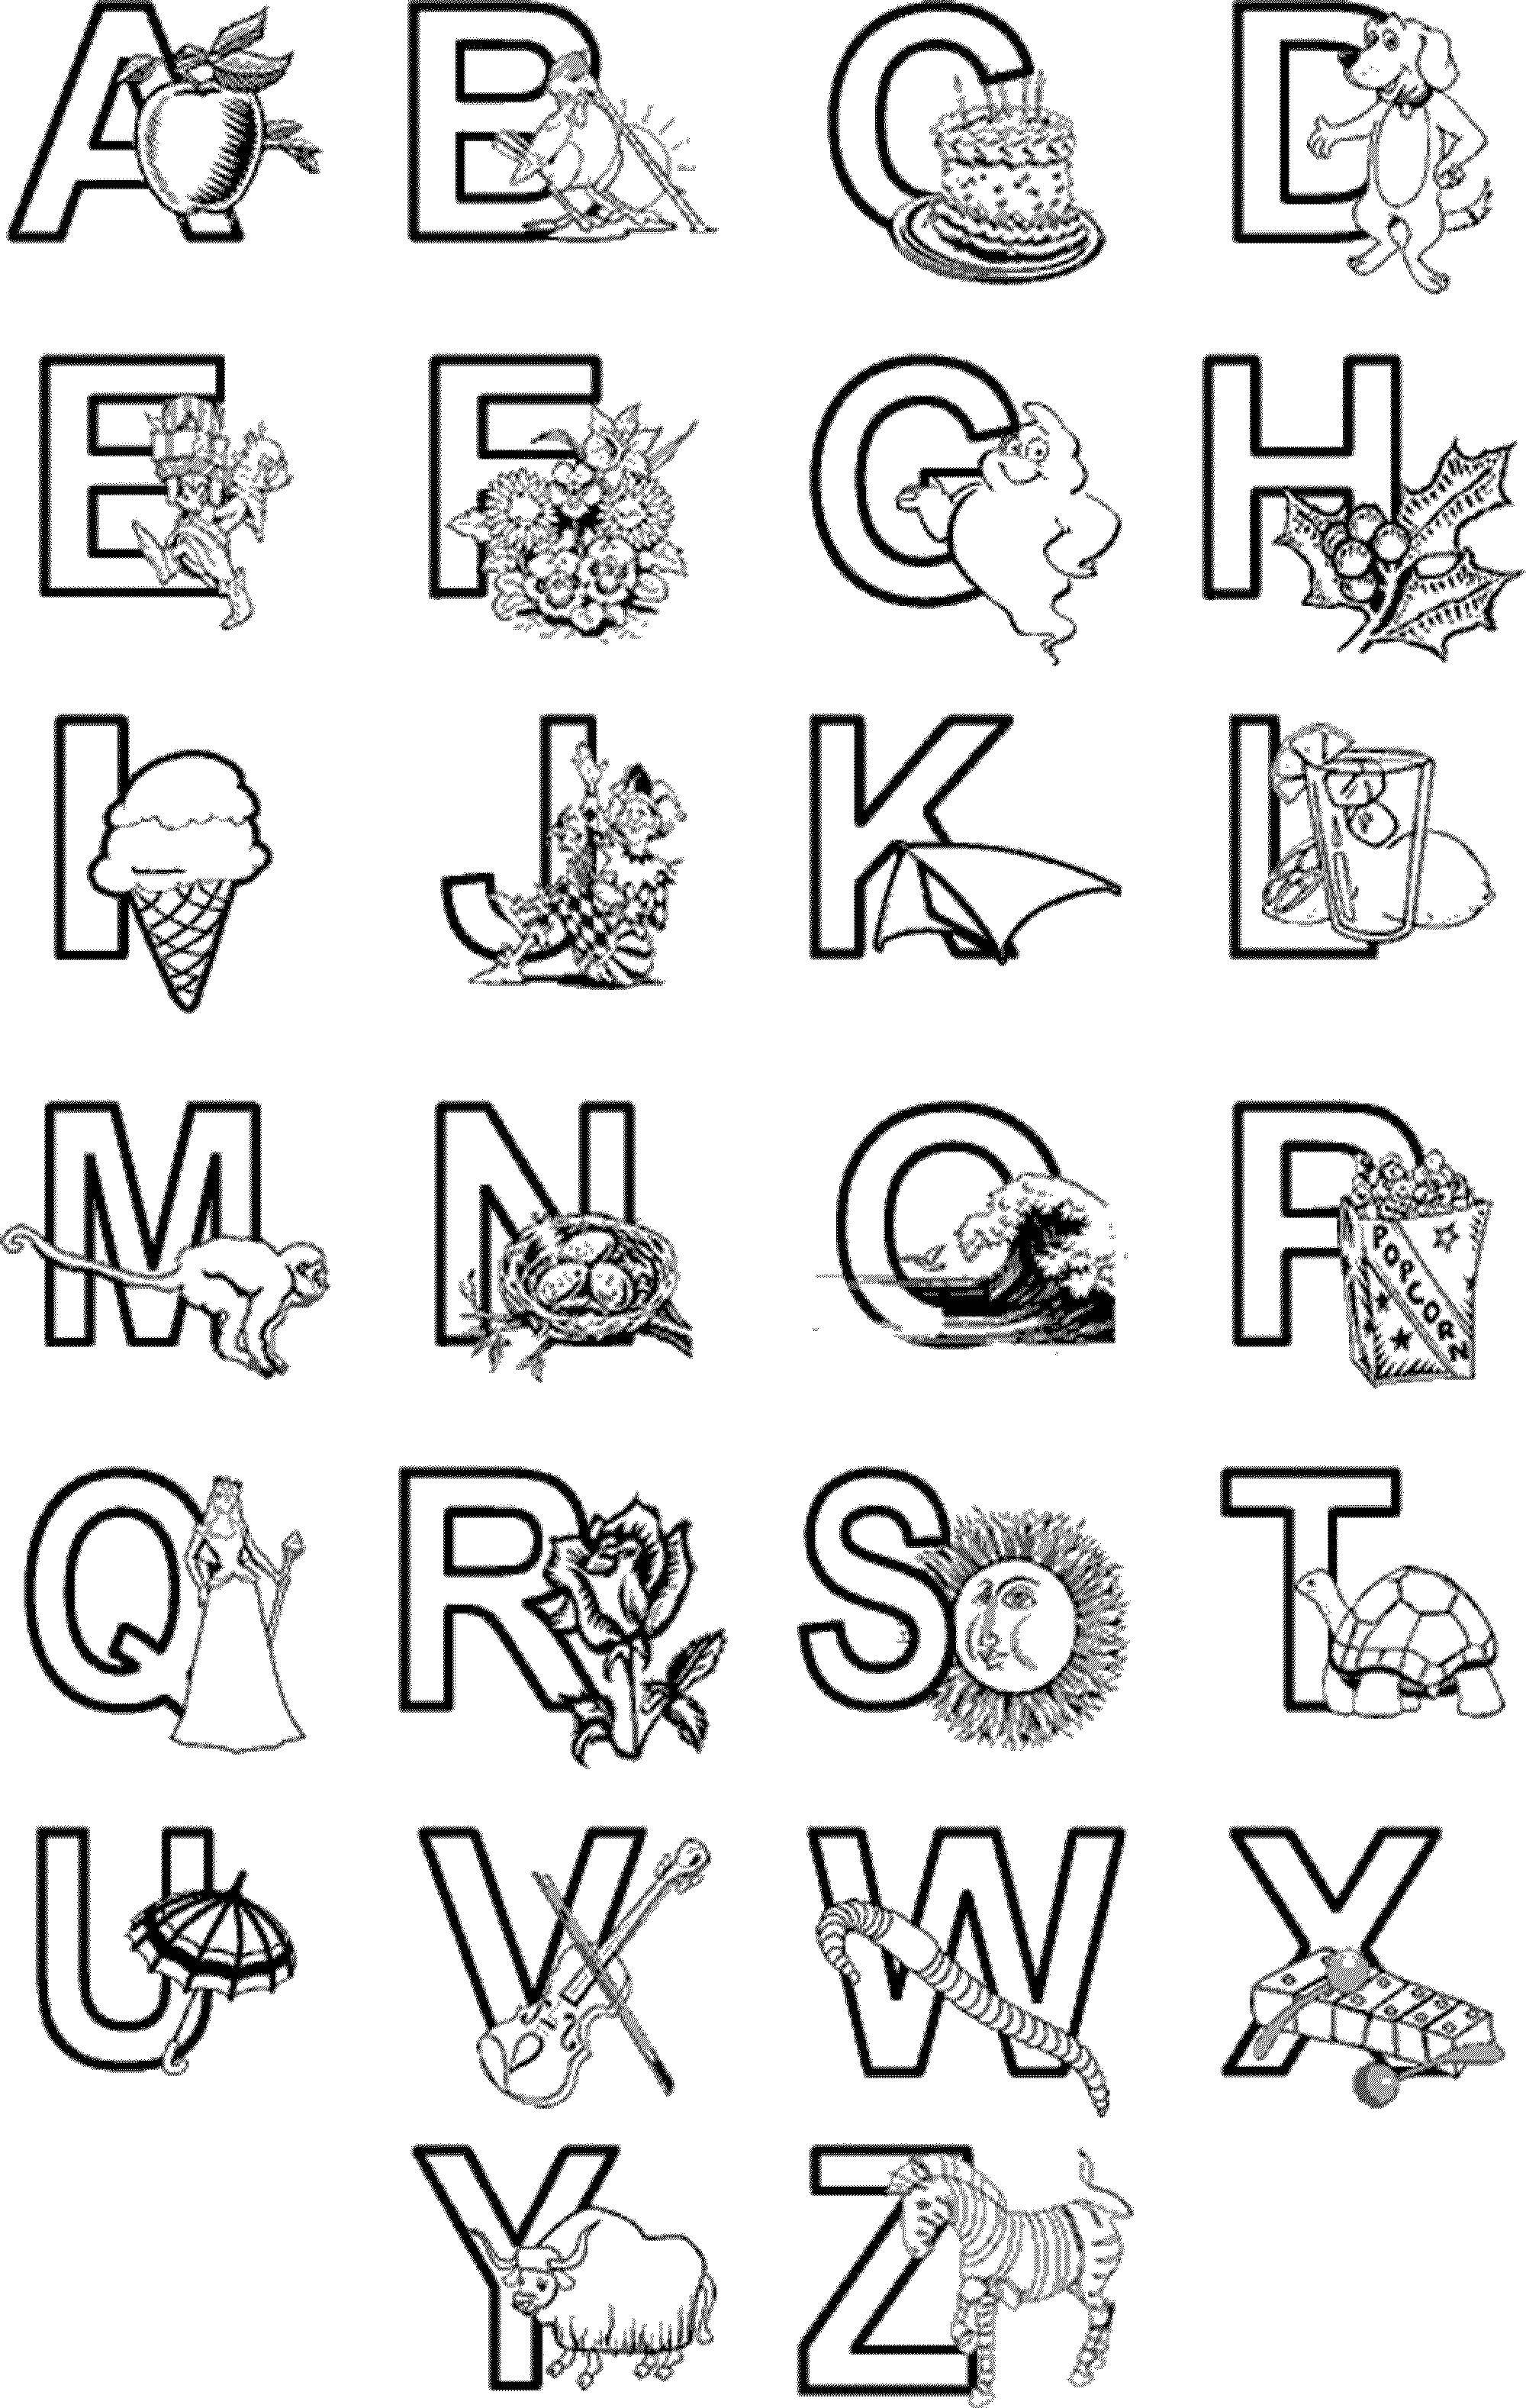 Coloring English alphabet letters. Category English alphabet. Tags:  The alphabet, letters, words.